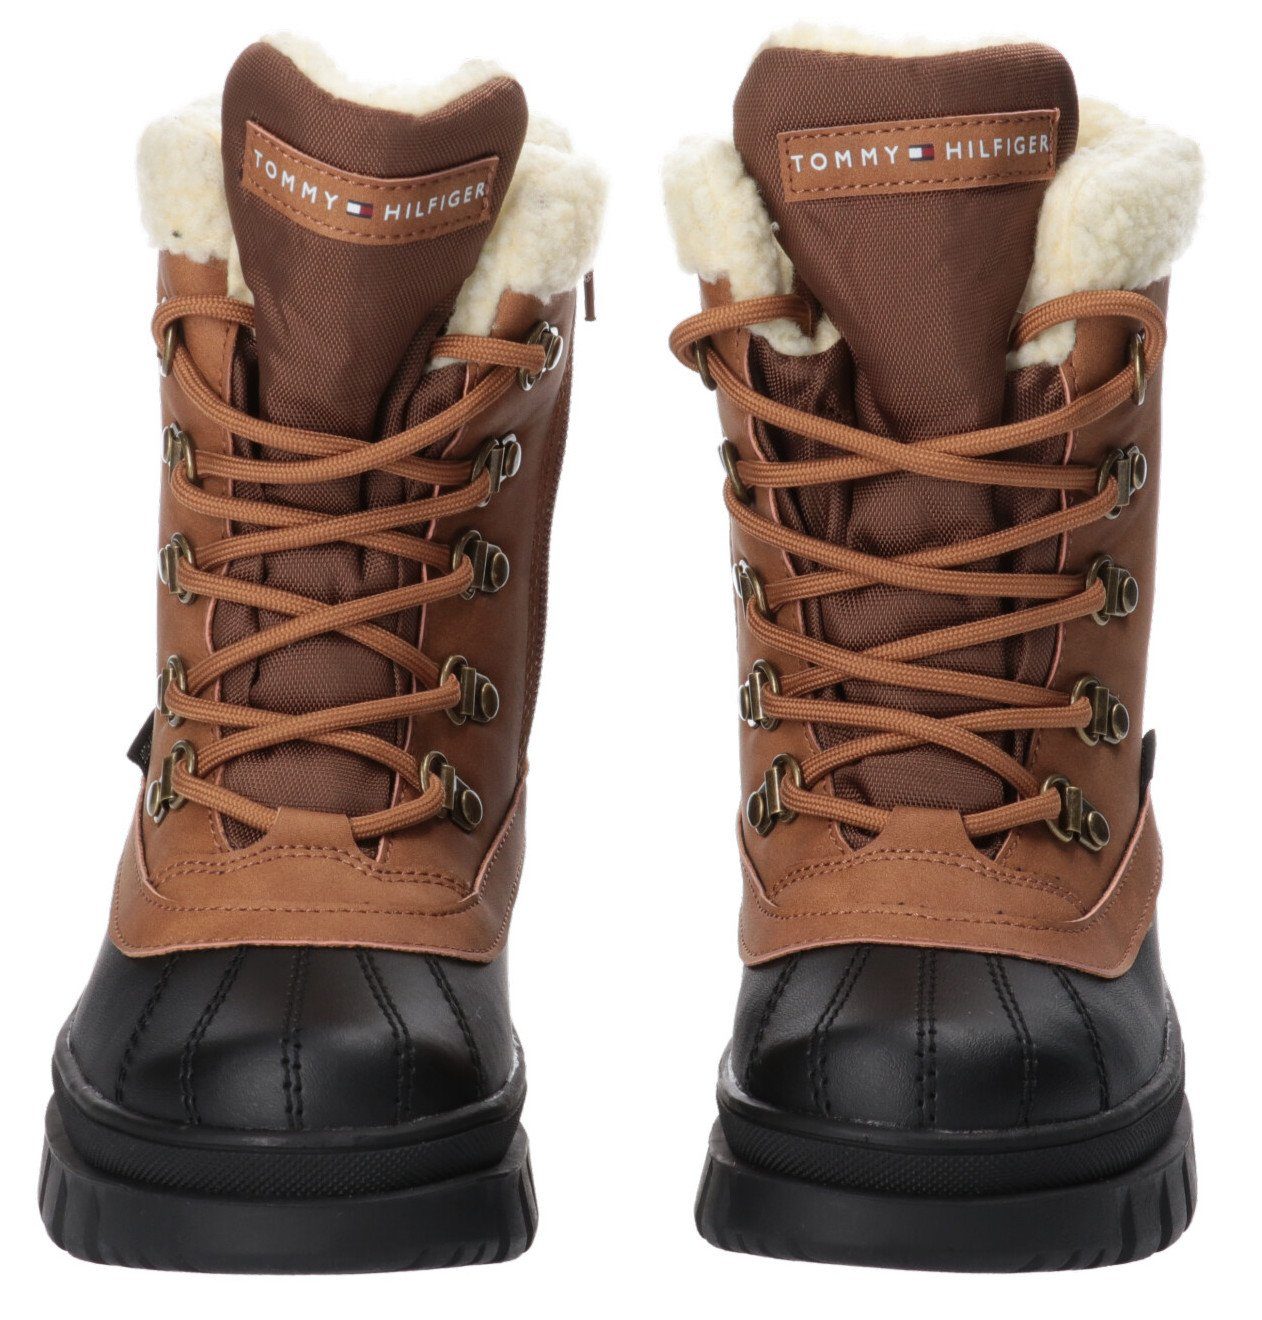 LACE-UP Hilfiger Tommy BOOT Warmfutter Thermostiefel mit Snowboots